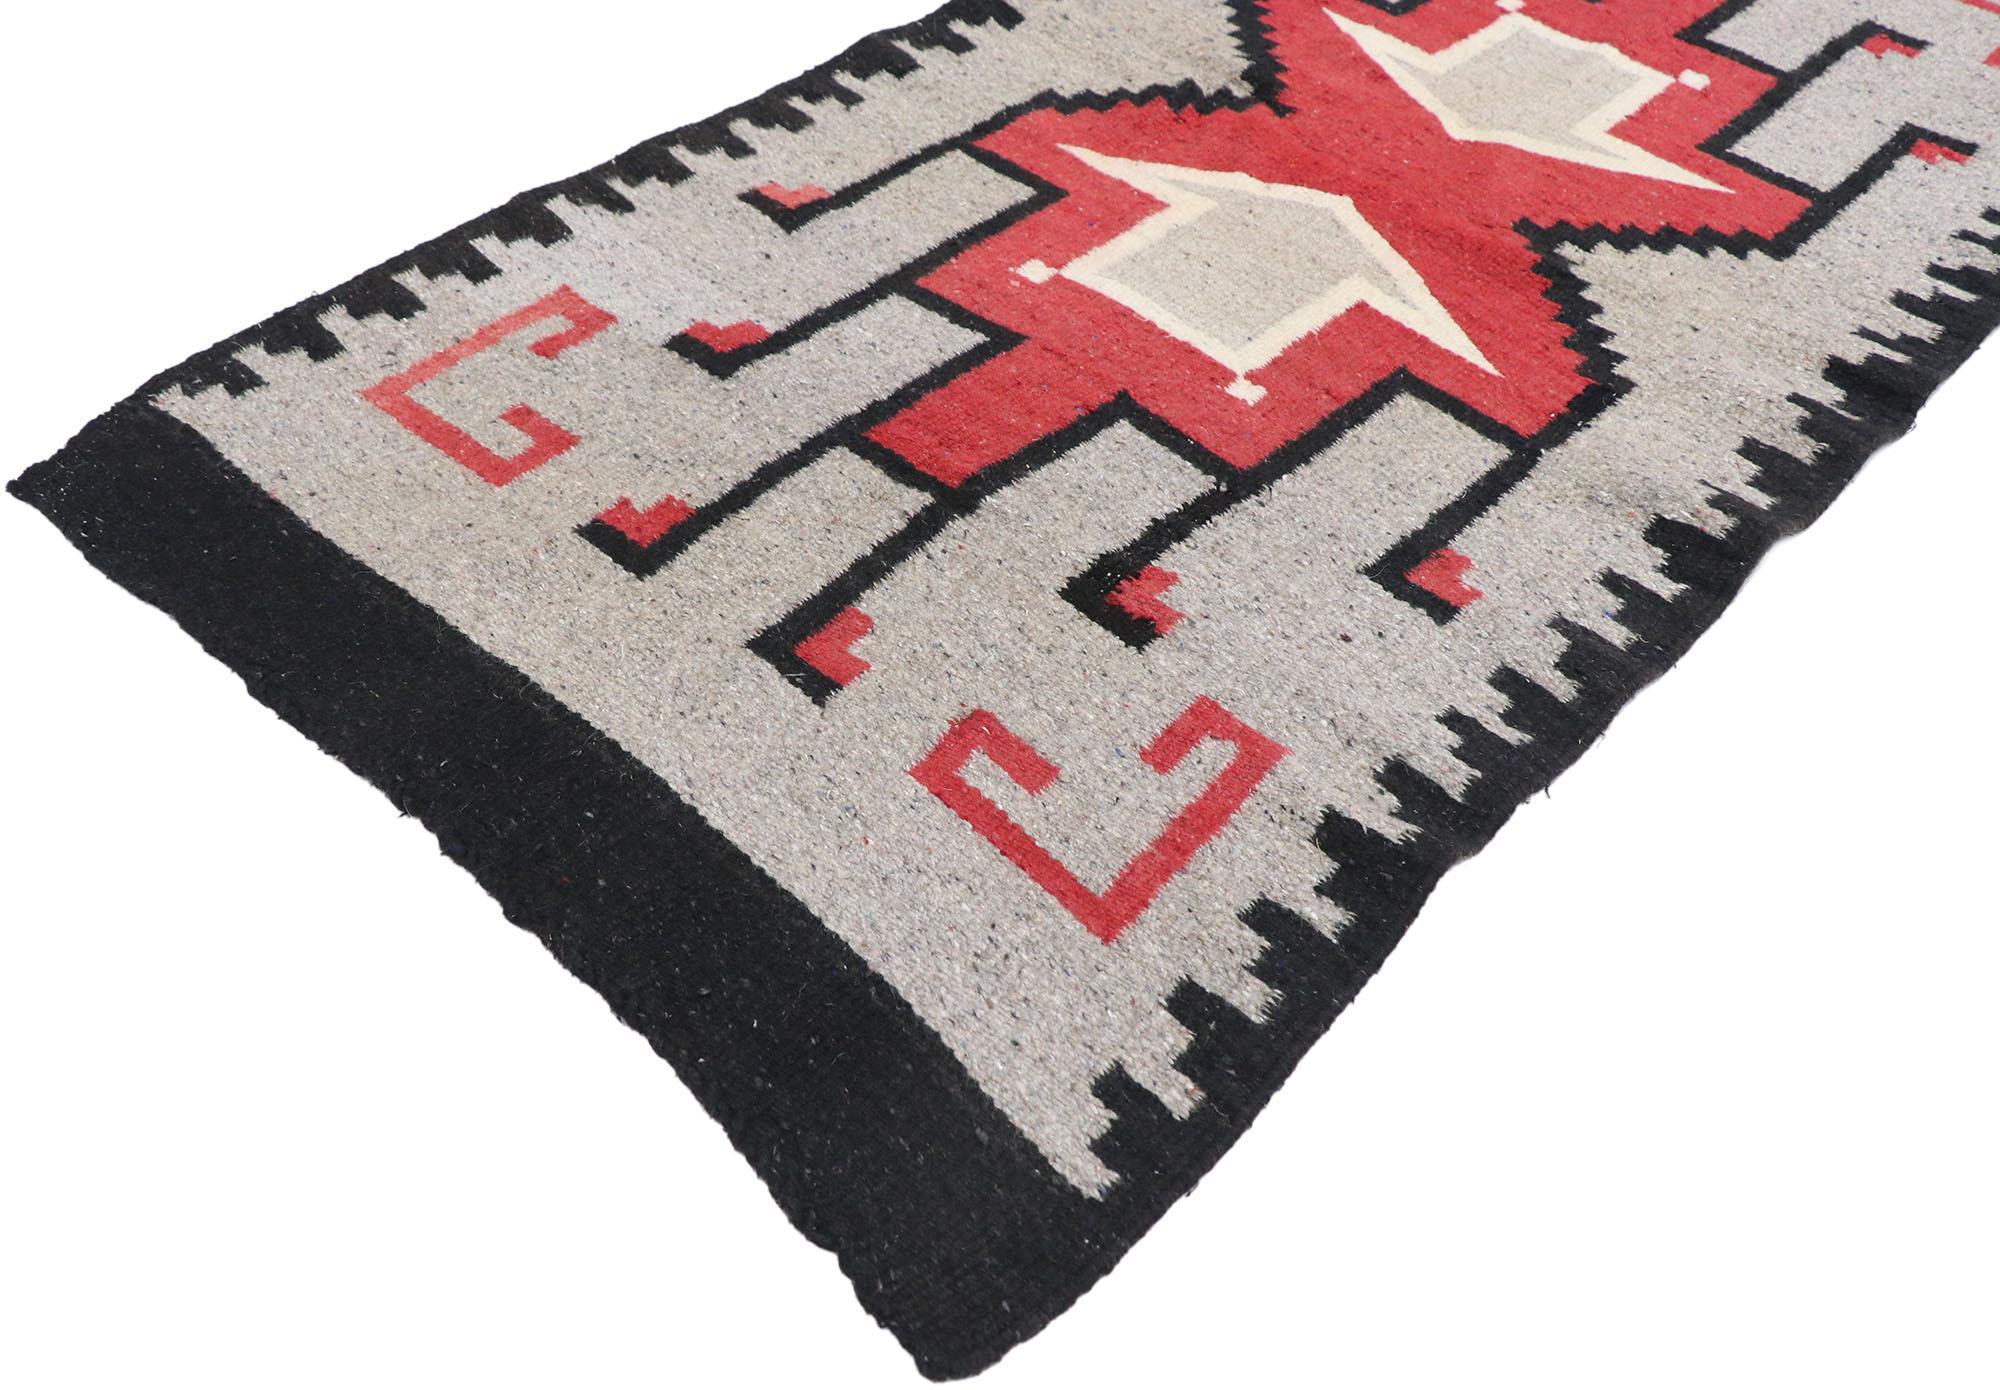 77767, vintage Navajo Kilim rug with Two Grey Hills style. With its bold expressive design, incredible detail and texture, this hand-woven wool vintage Navajo Kilim rug is a captivating vision of woven beauty highlighting Native American style with